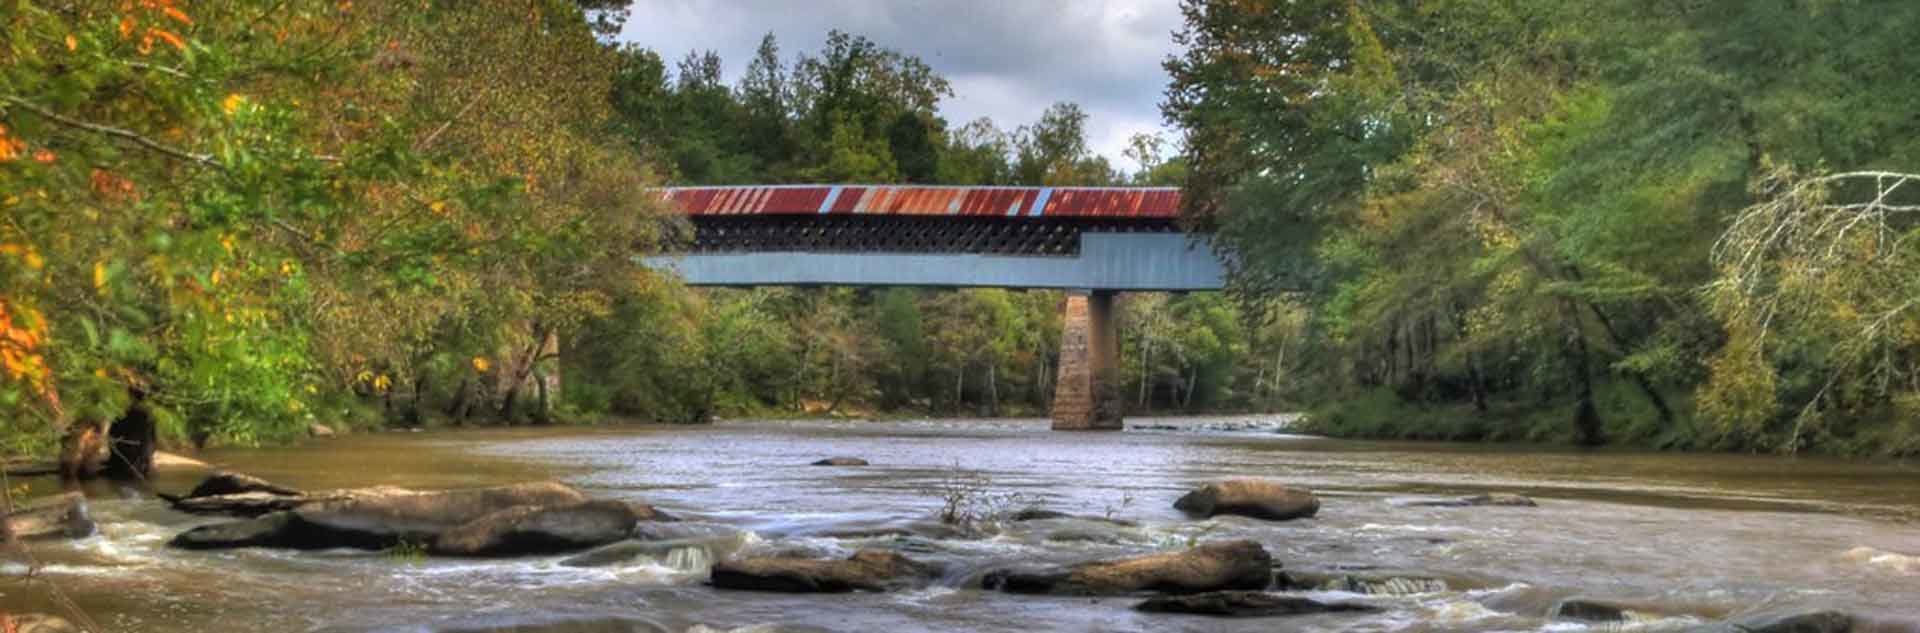 A view of Blount County covered bridge